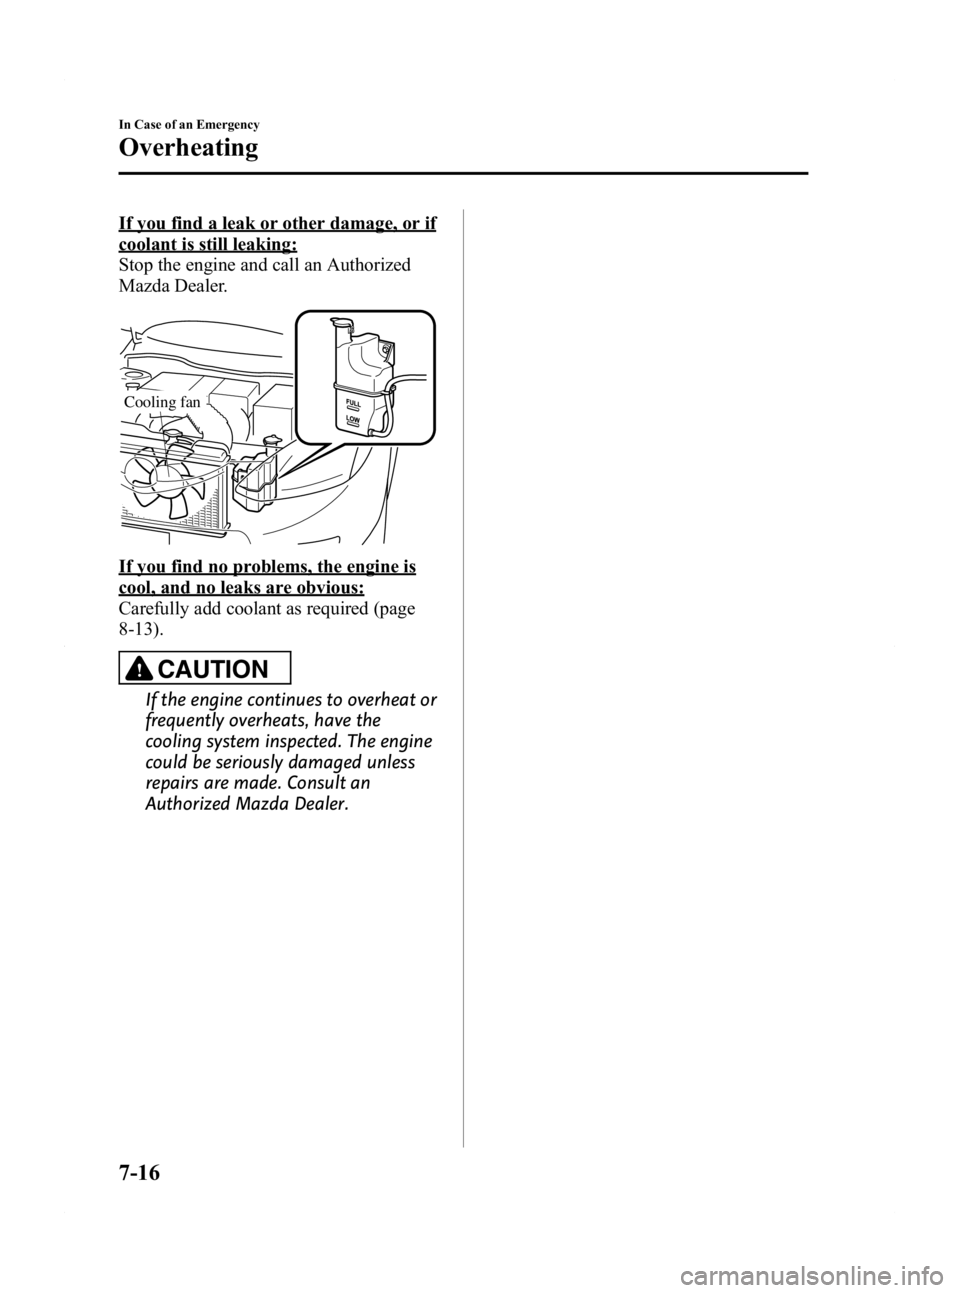 MAZDA MODEL 2 2011  Owners Manual Black plate (224,1)
If you find a leak or other damage, or if
coolant is still leaking:
Stop the engine and call an Authorized
Mazda Dealer.
Cooling fan
If you find no problems, the engine is
cool, an